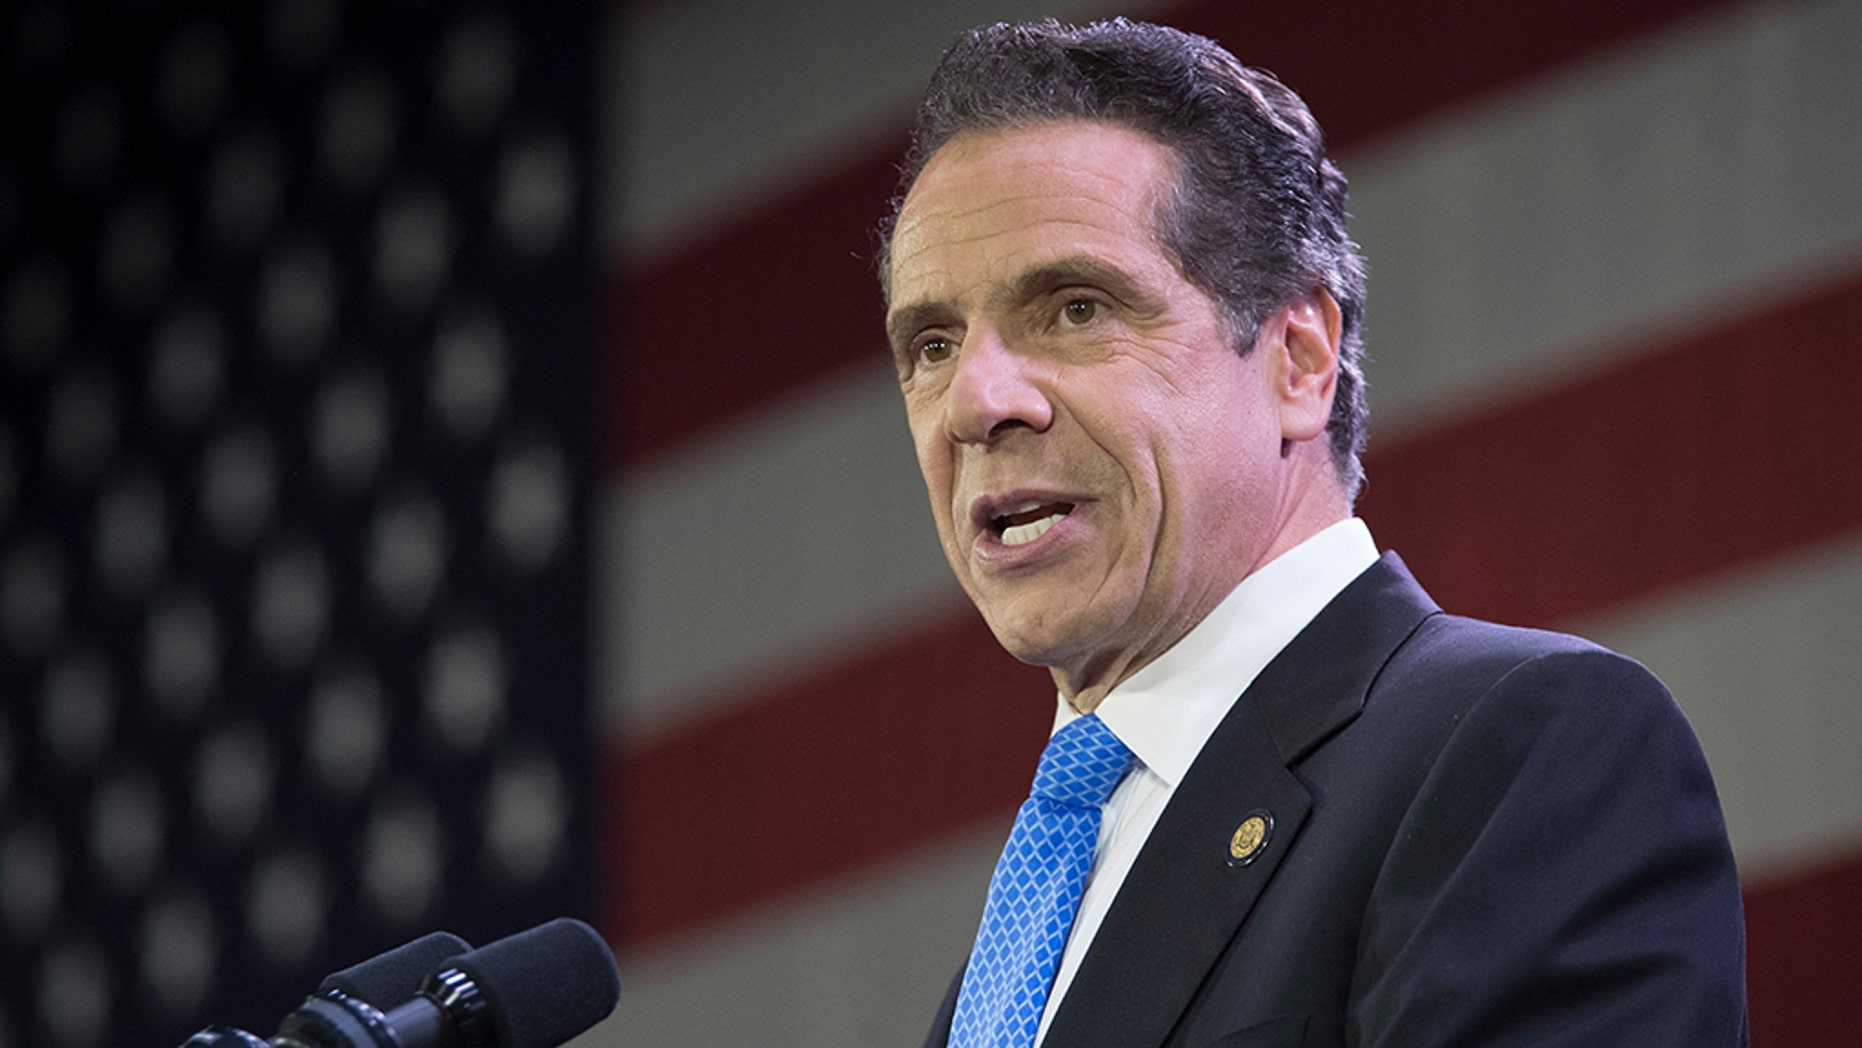 New York Gov. Cuomo to propose ban on single-use plastic bags in next state budget